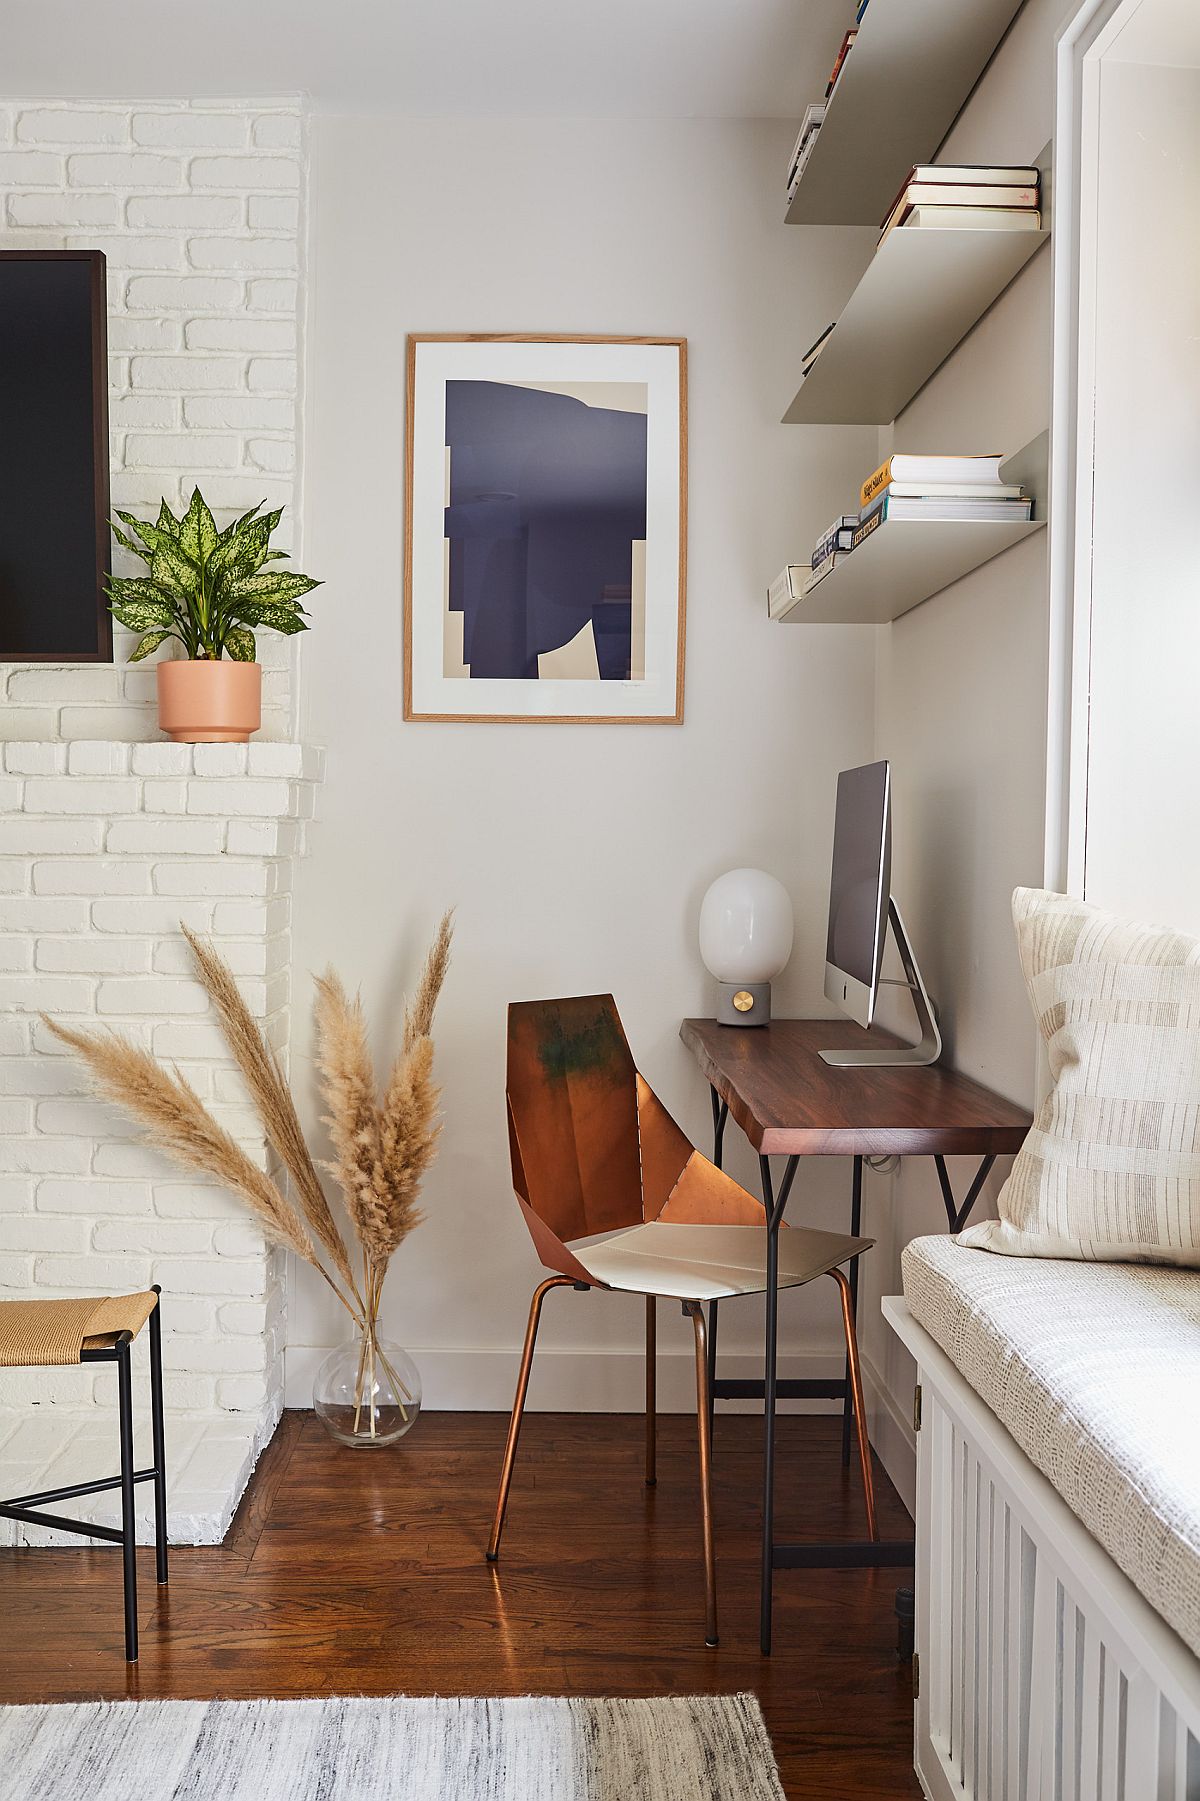 Three-floating-shelves-and-desk-tiurn-the-corner-into-a-cozy-home-workspace-32096